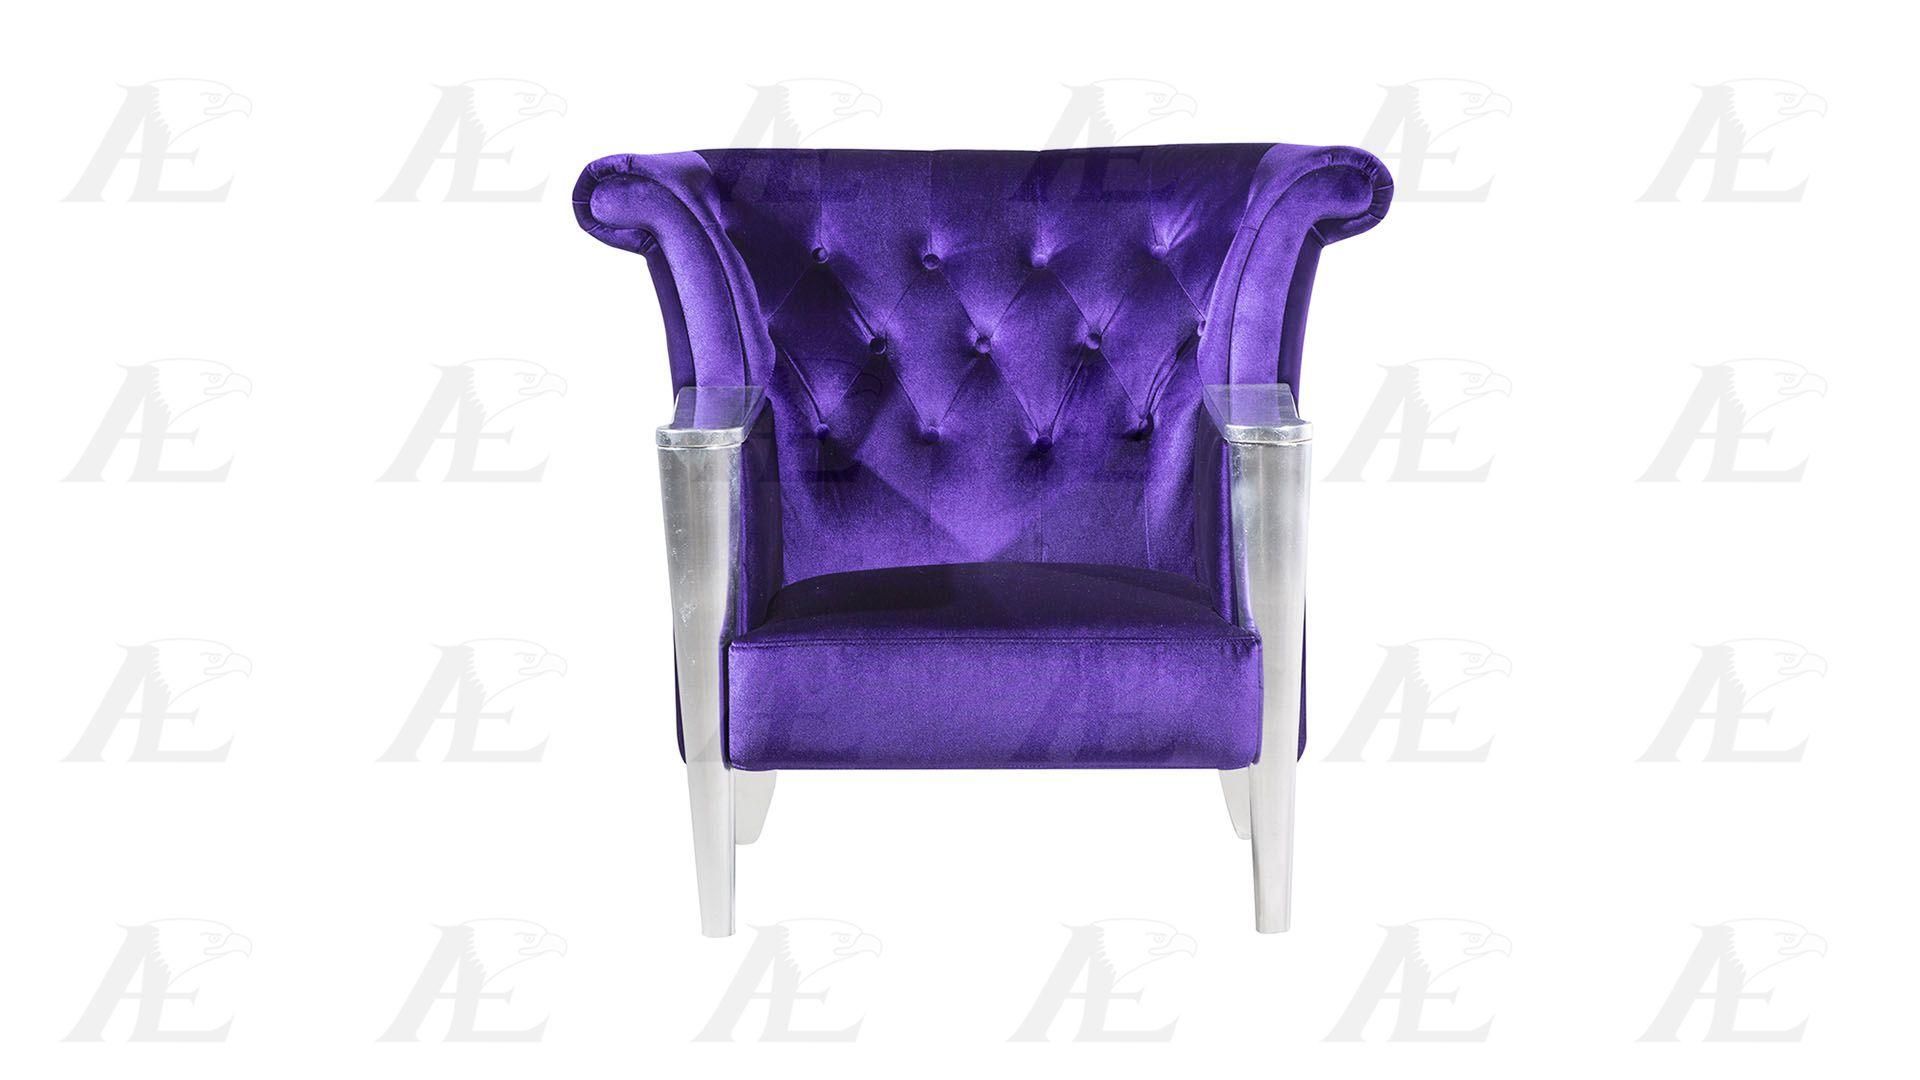 

    
AE592 Sofa Loveseat and Chair Set
